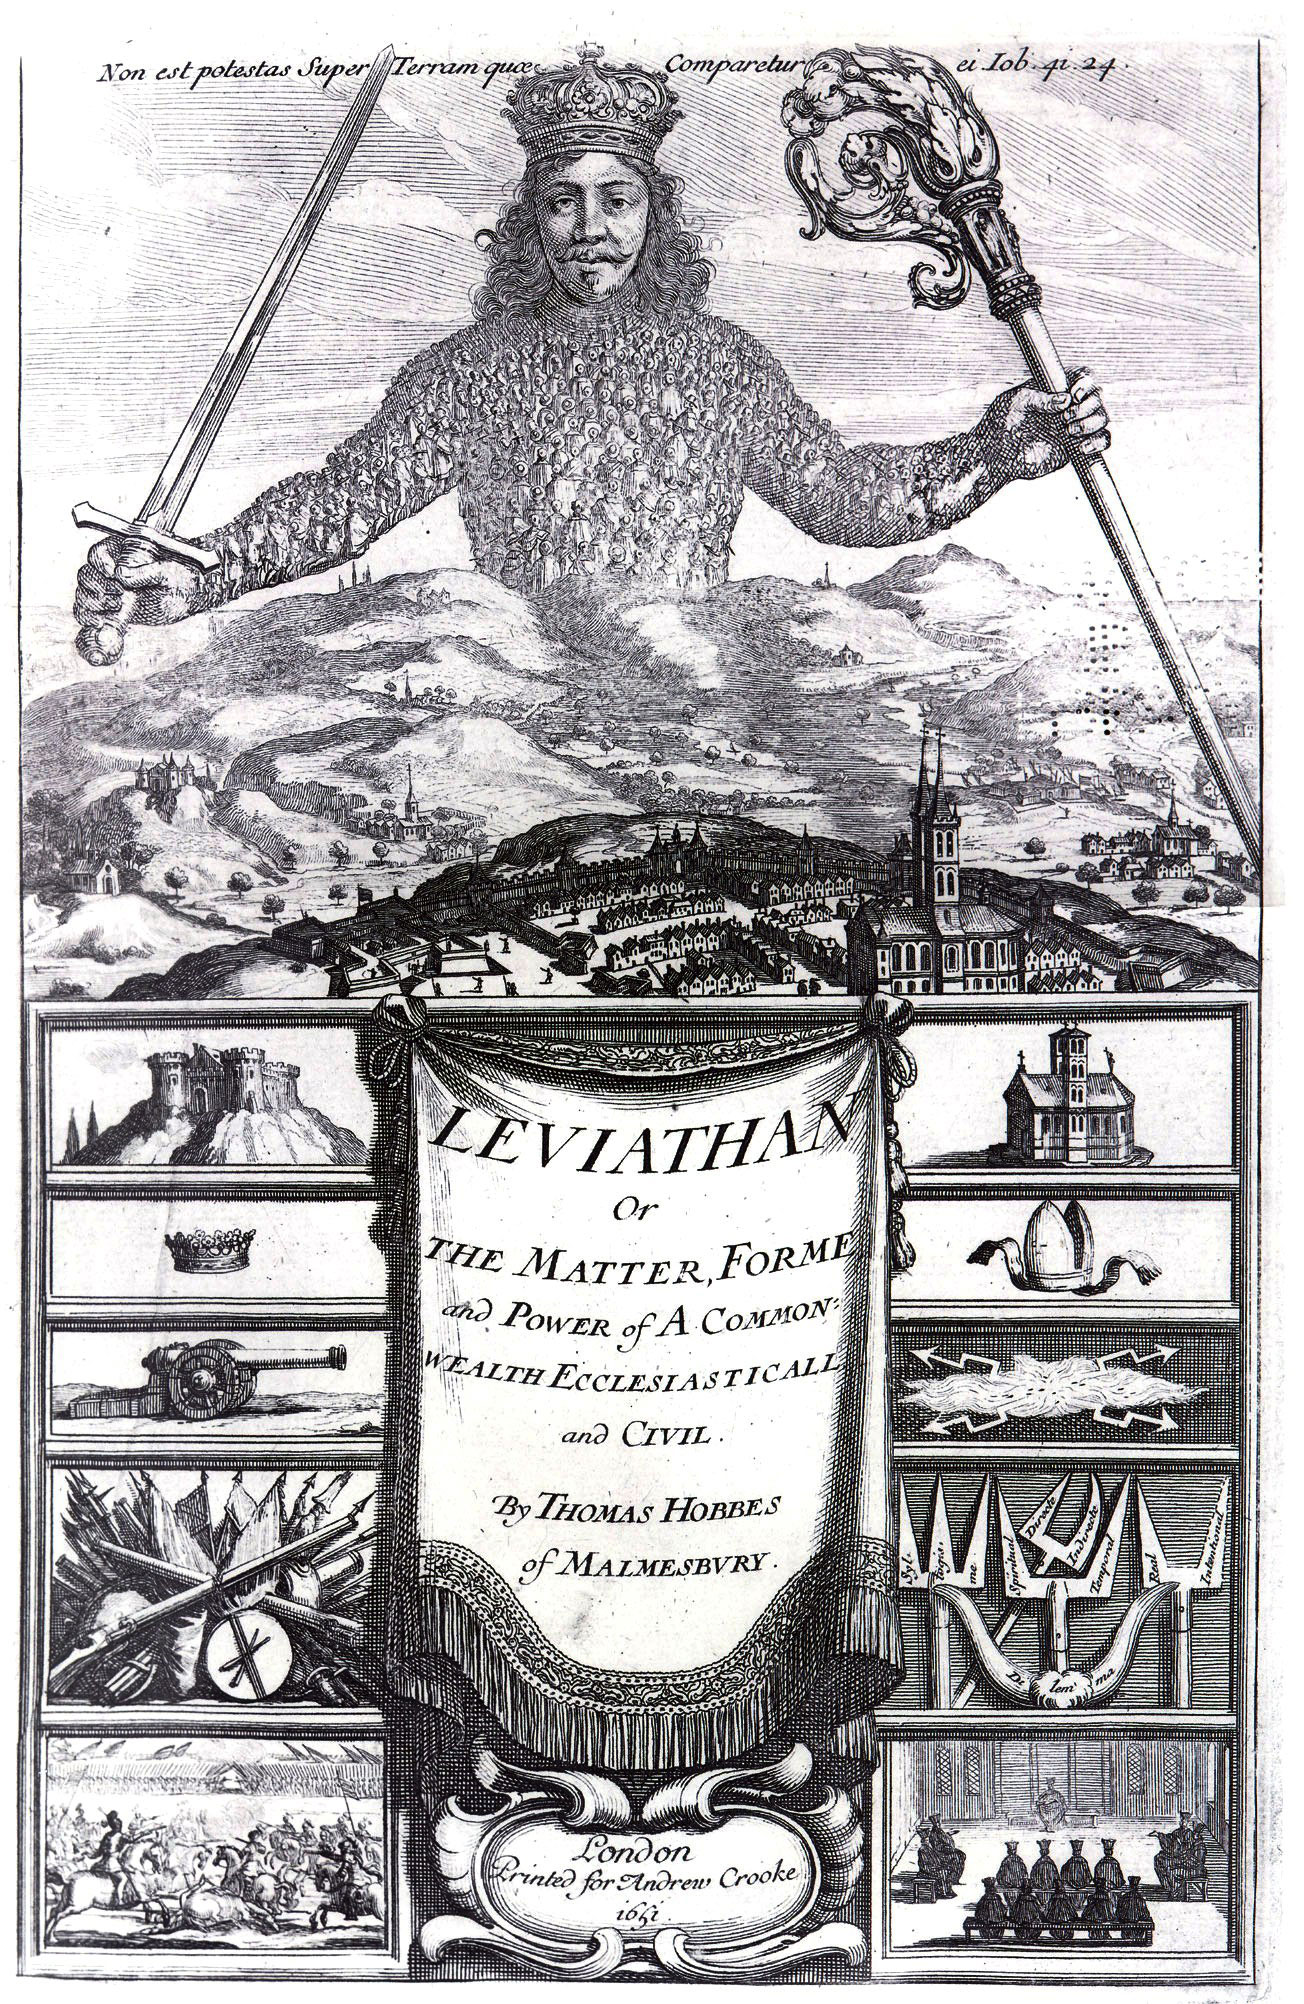 The frontispiece for Leviathan (1651) by Thomas Hobbes, etching by Abraham Bosse. From Body of Art